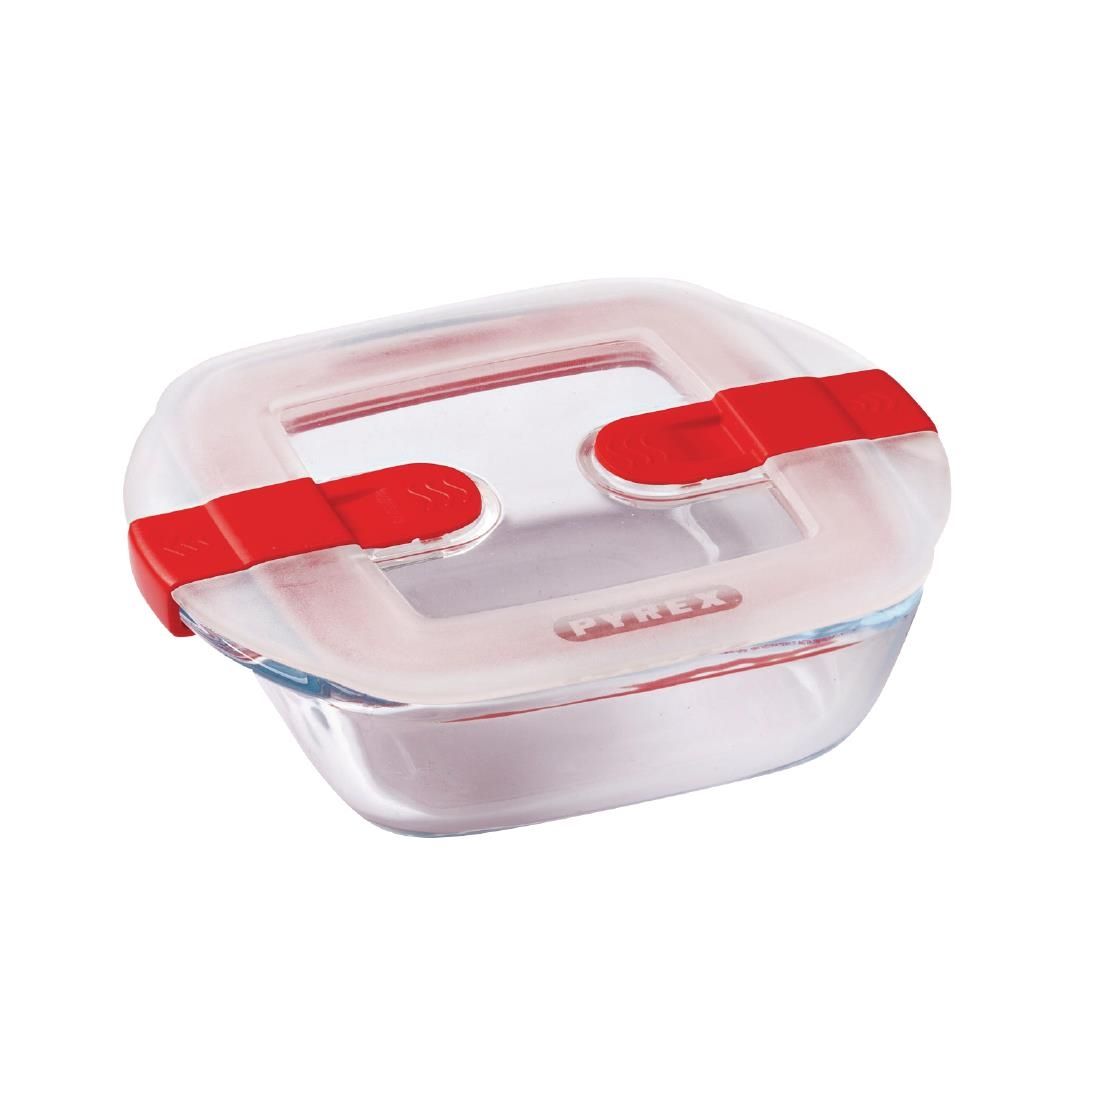 FC363 Pyrex Cook and Heat Square Dish with Lid 350ml JD Catering Equipment Solutions Ltd